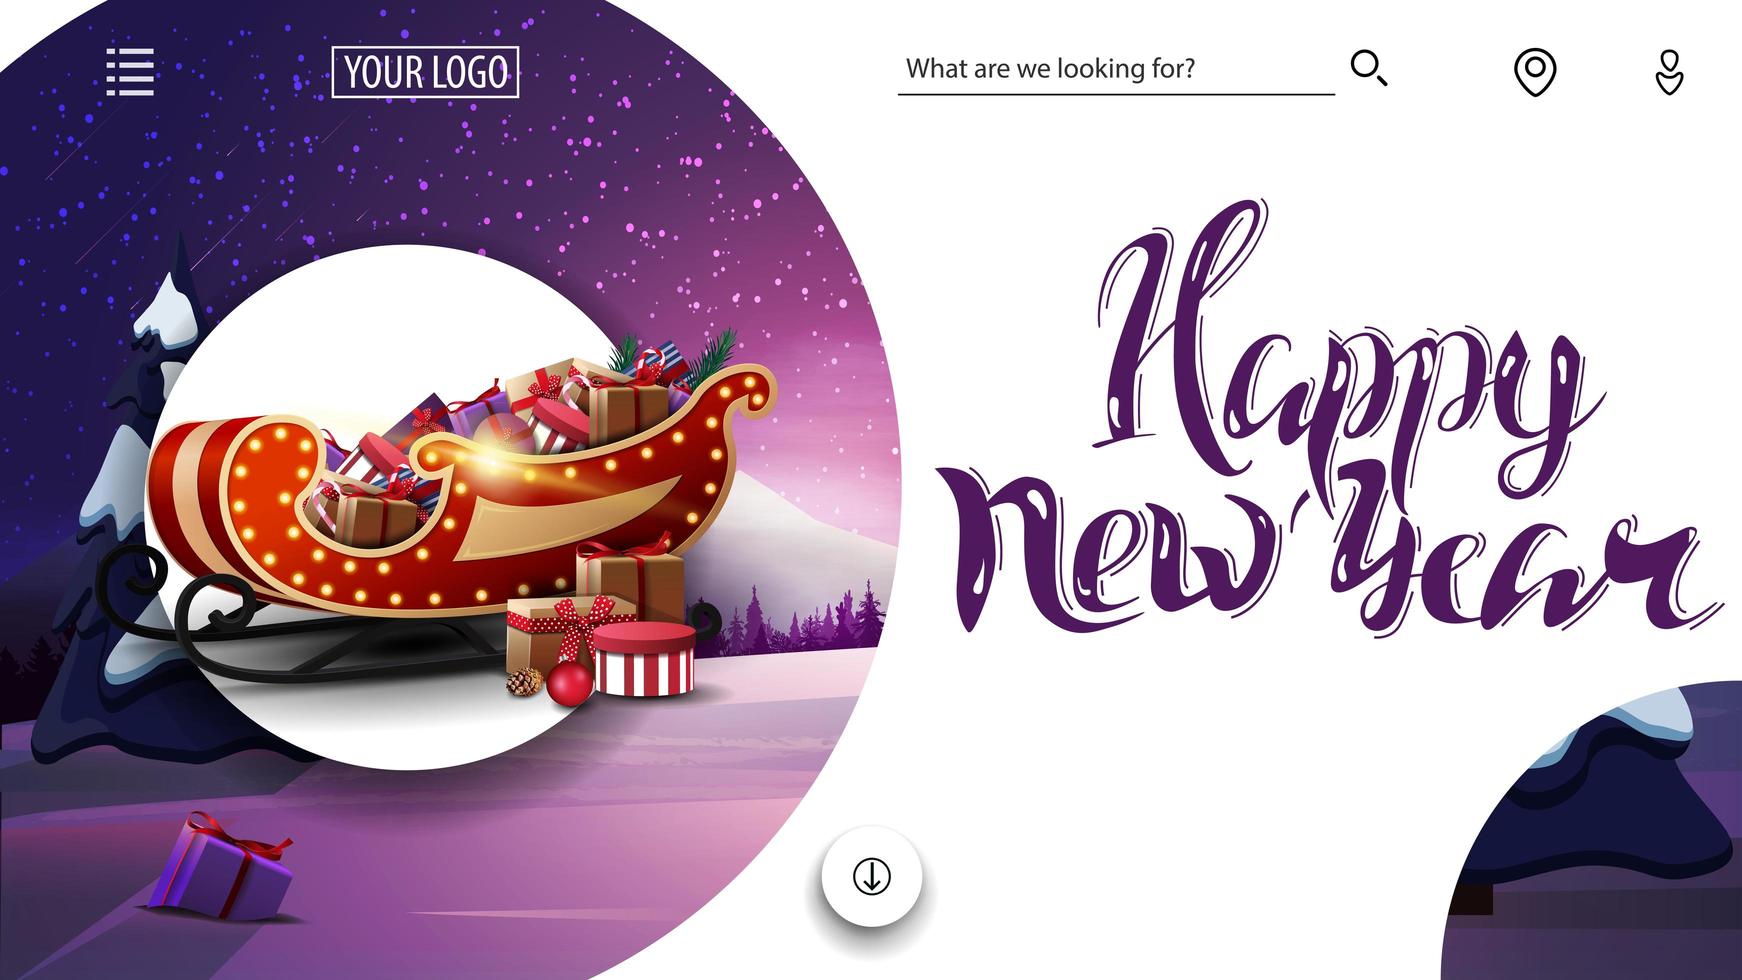 Happy New Year, pink and white greeting card for website with winter landscape and Santa Sleigh with presents vector